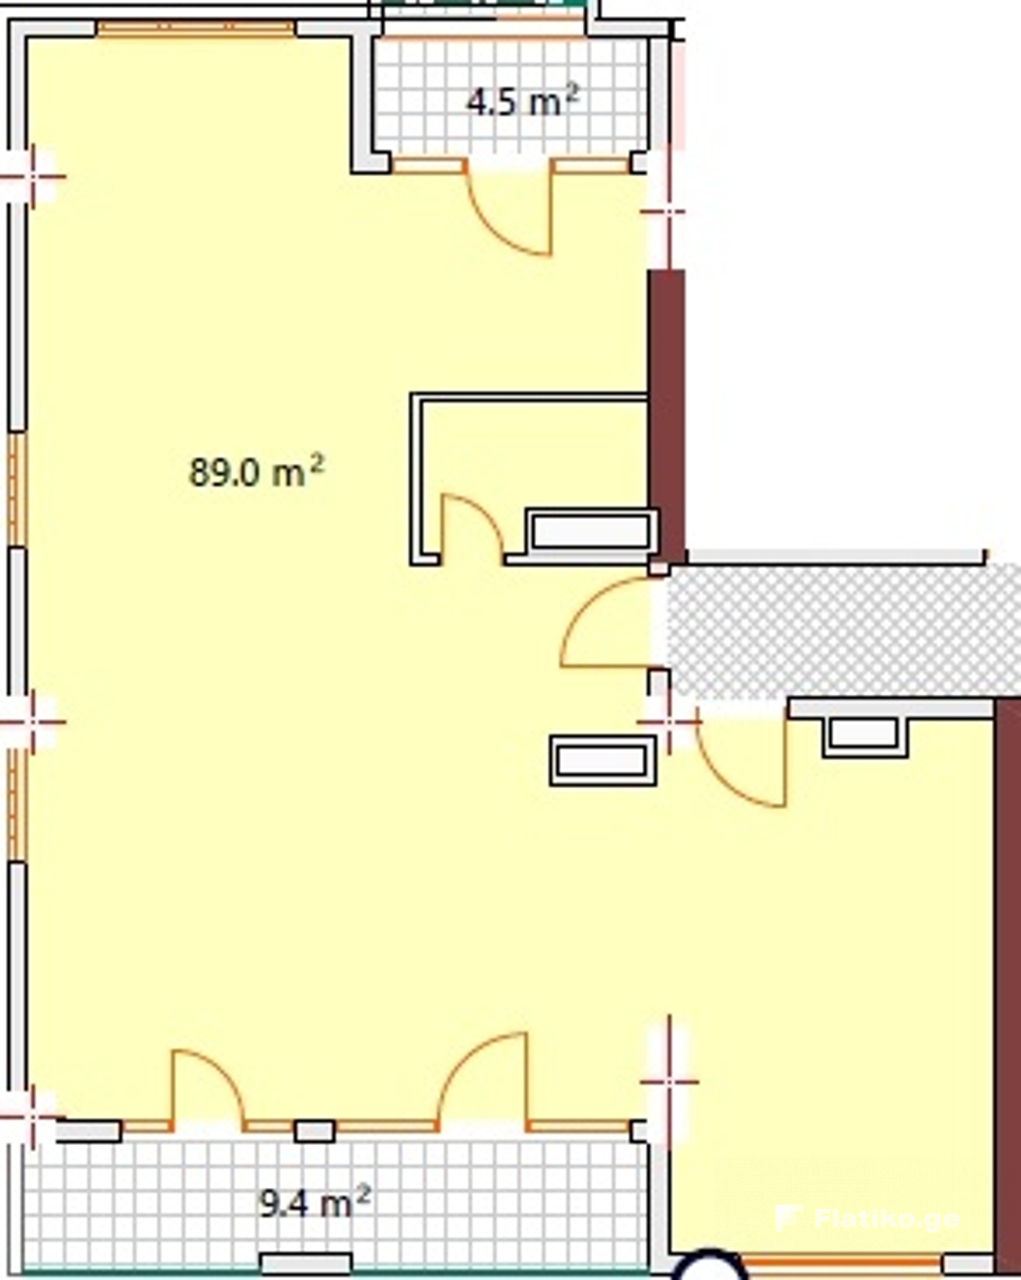 Layout with no partitions Block 1